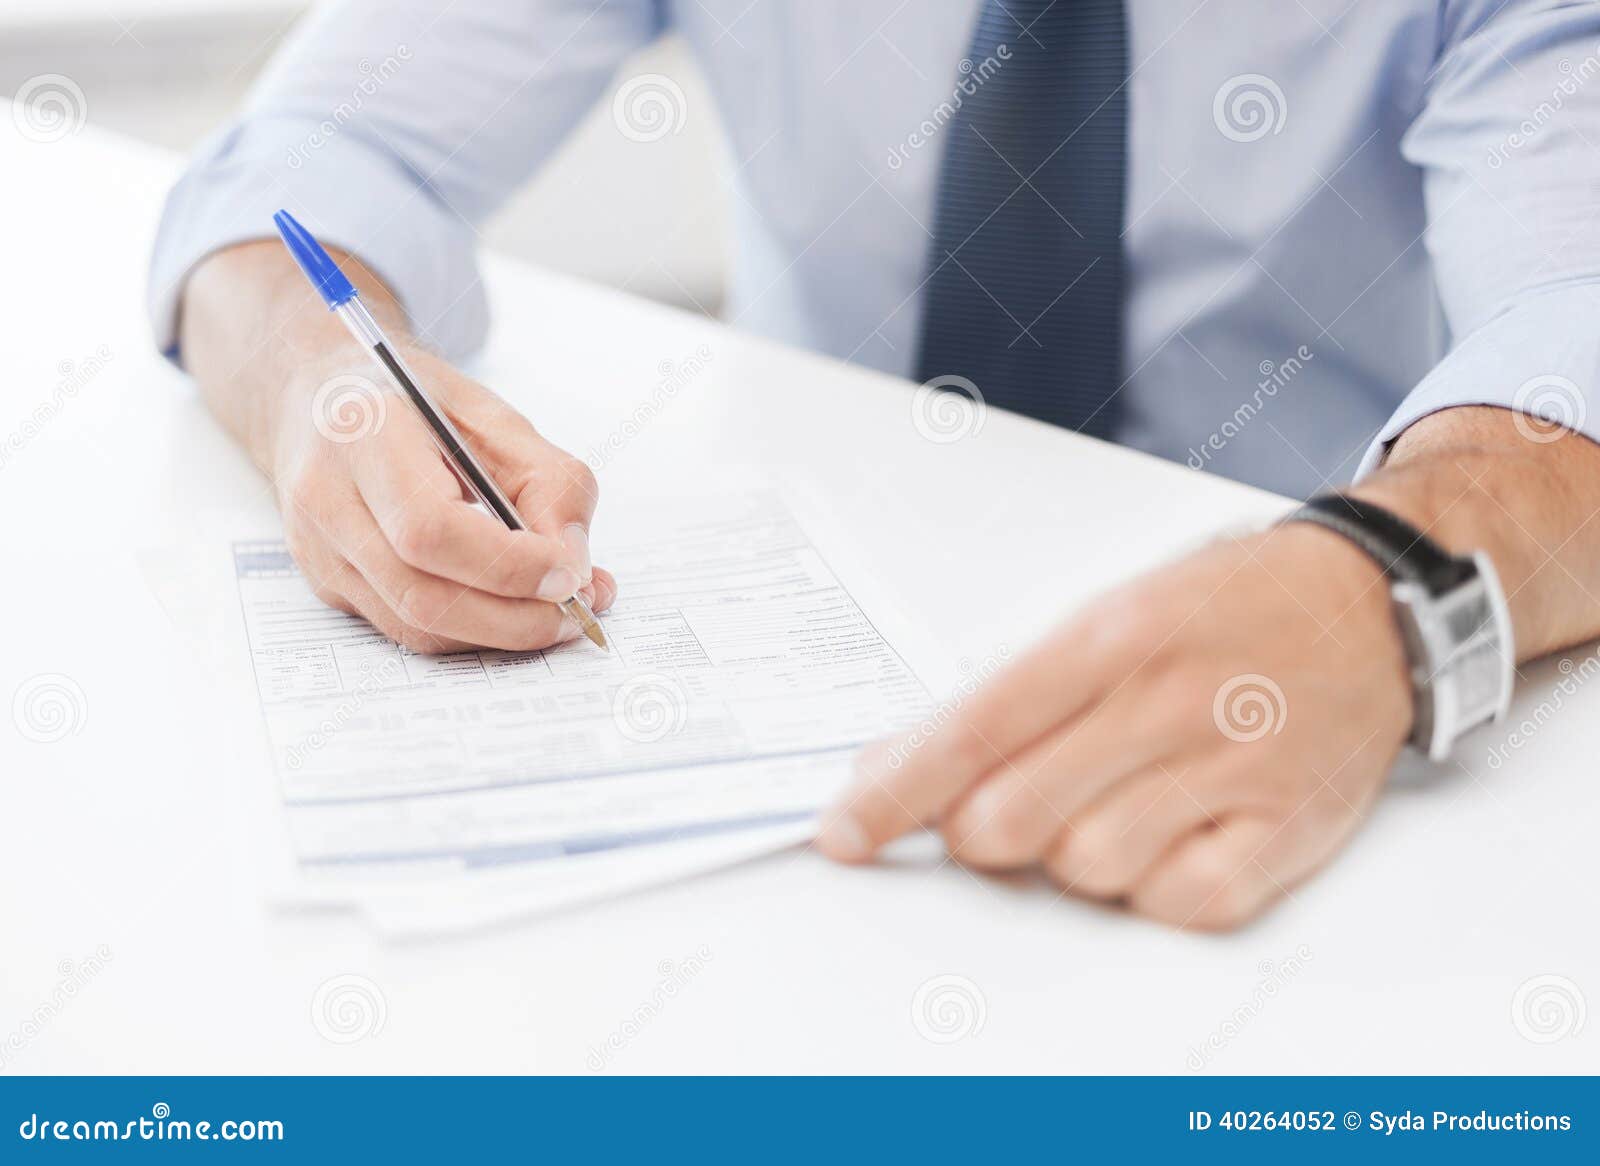 Man signing a contract stock photo. Image of employment - 40264052